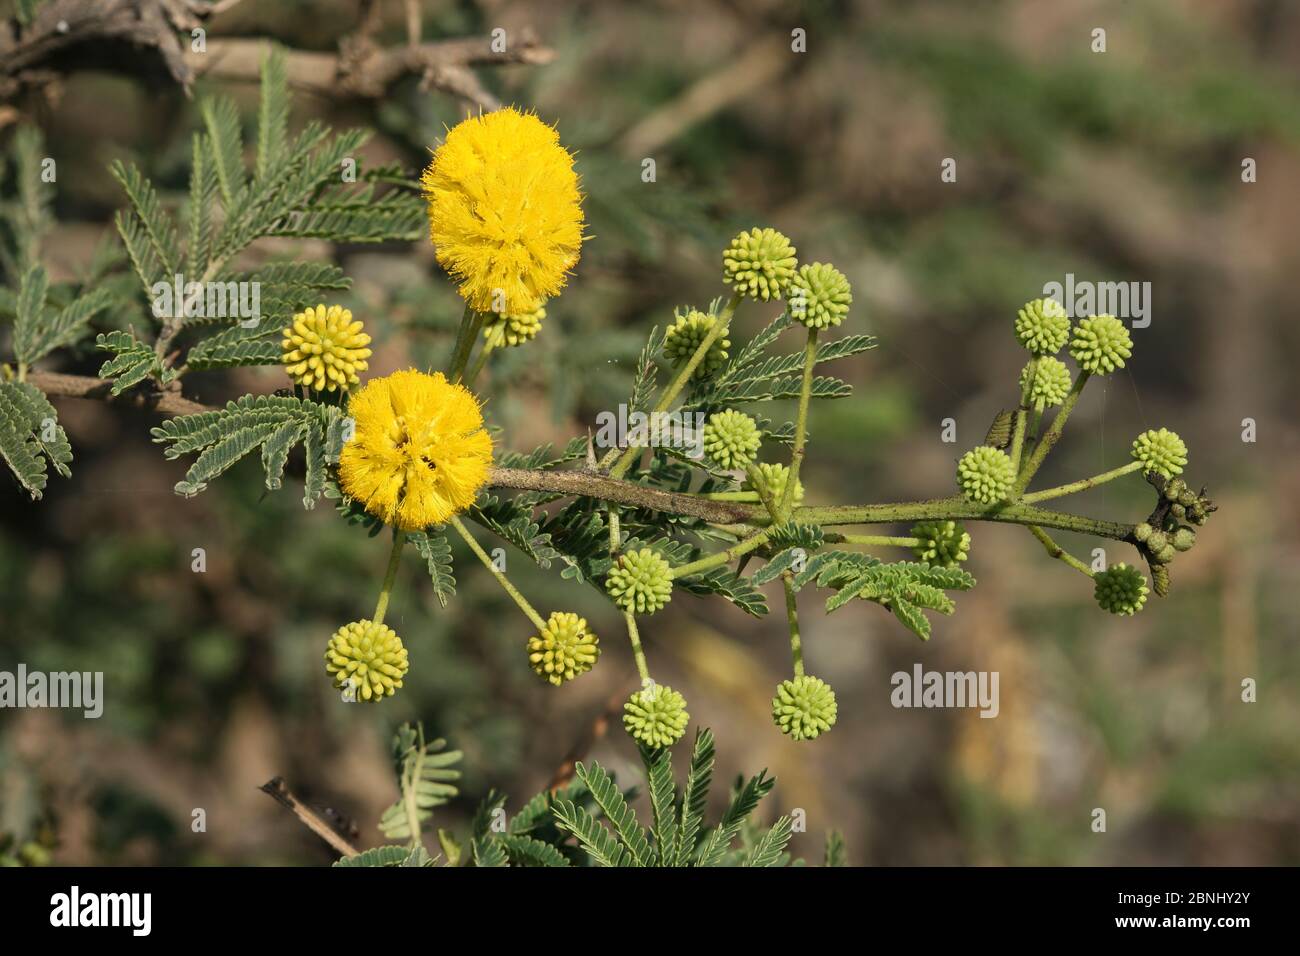 Gum arabic tree (Acacia nilotica) close-up of flowers created with Helicon Focus, Oman, September Stock Photo